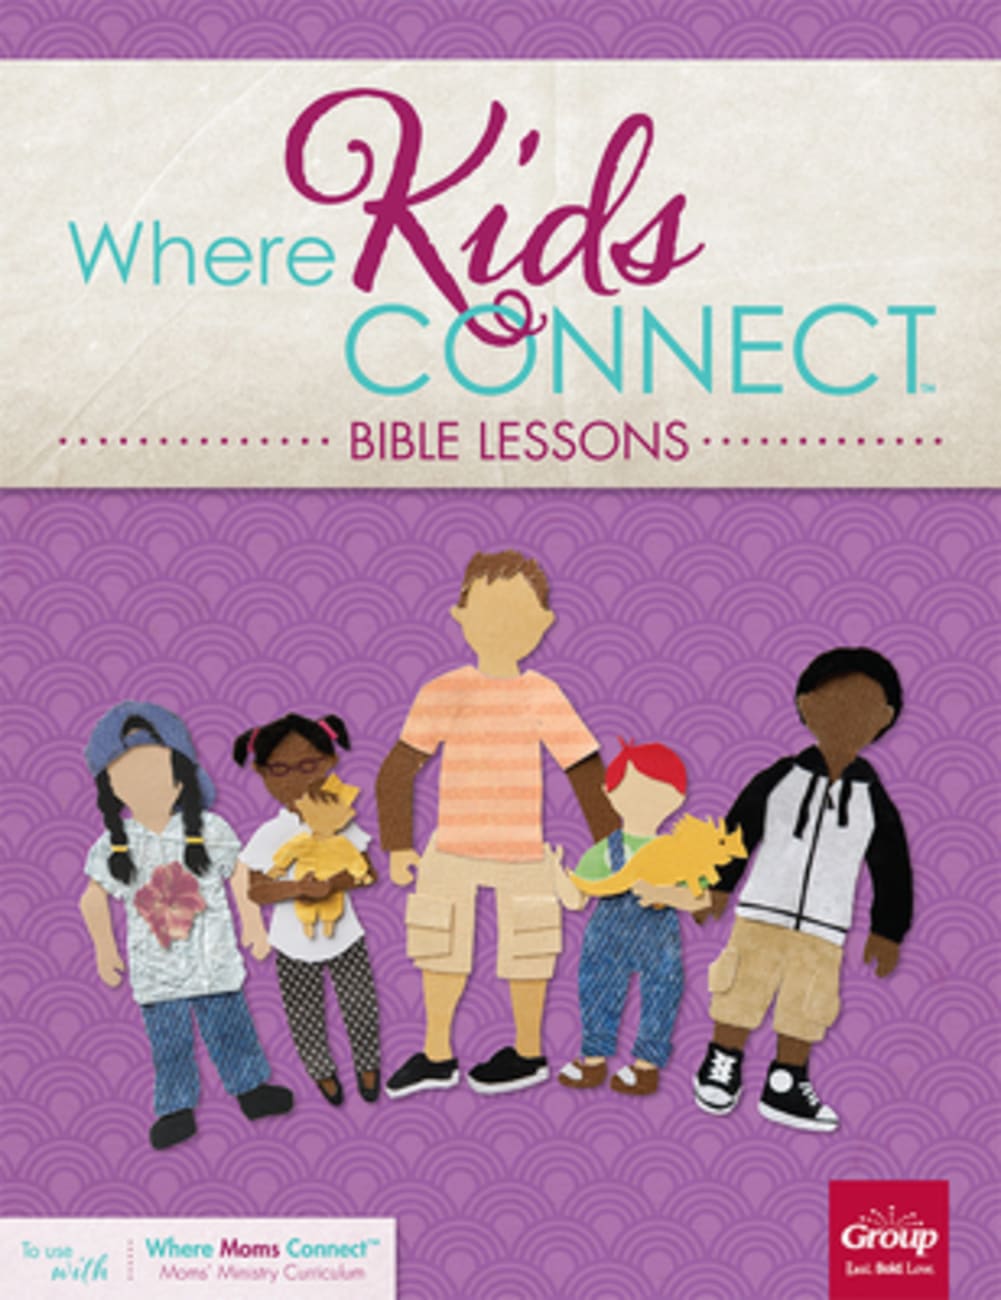 Where Kids Connect Bible Lessons, Volume 3 (Where Kids Connect Series) Paperback